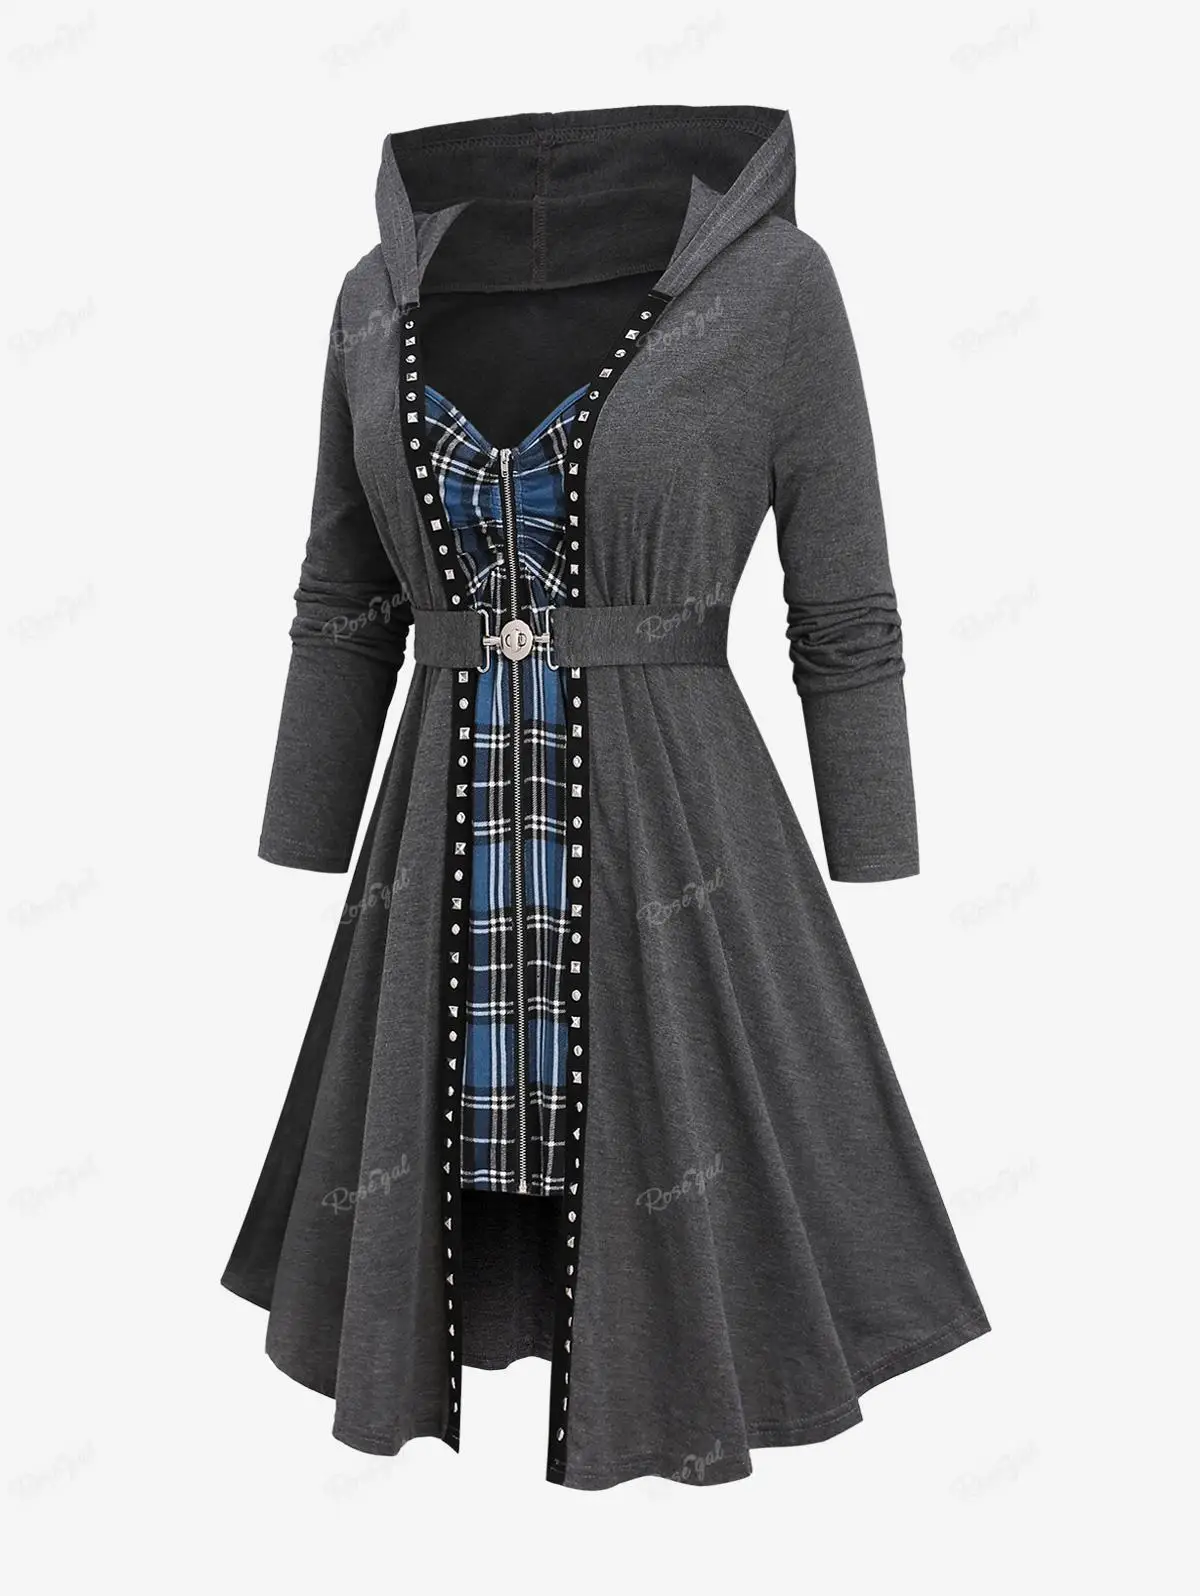 

ROSEGAL Autumn Winter Women's Plus Size Zipper Coats Gray Outwear Plaid Cinched Patchwork Rivet Ruched Buckle Belted Hooded Coat